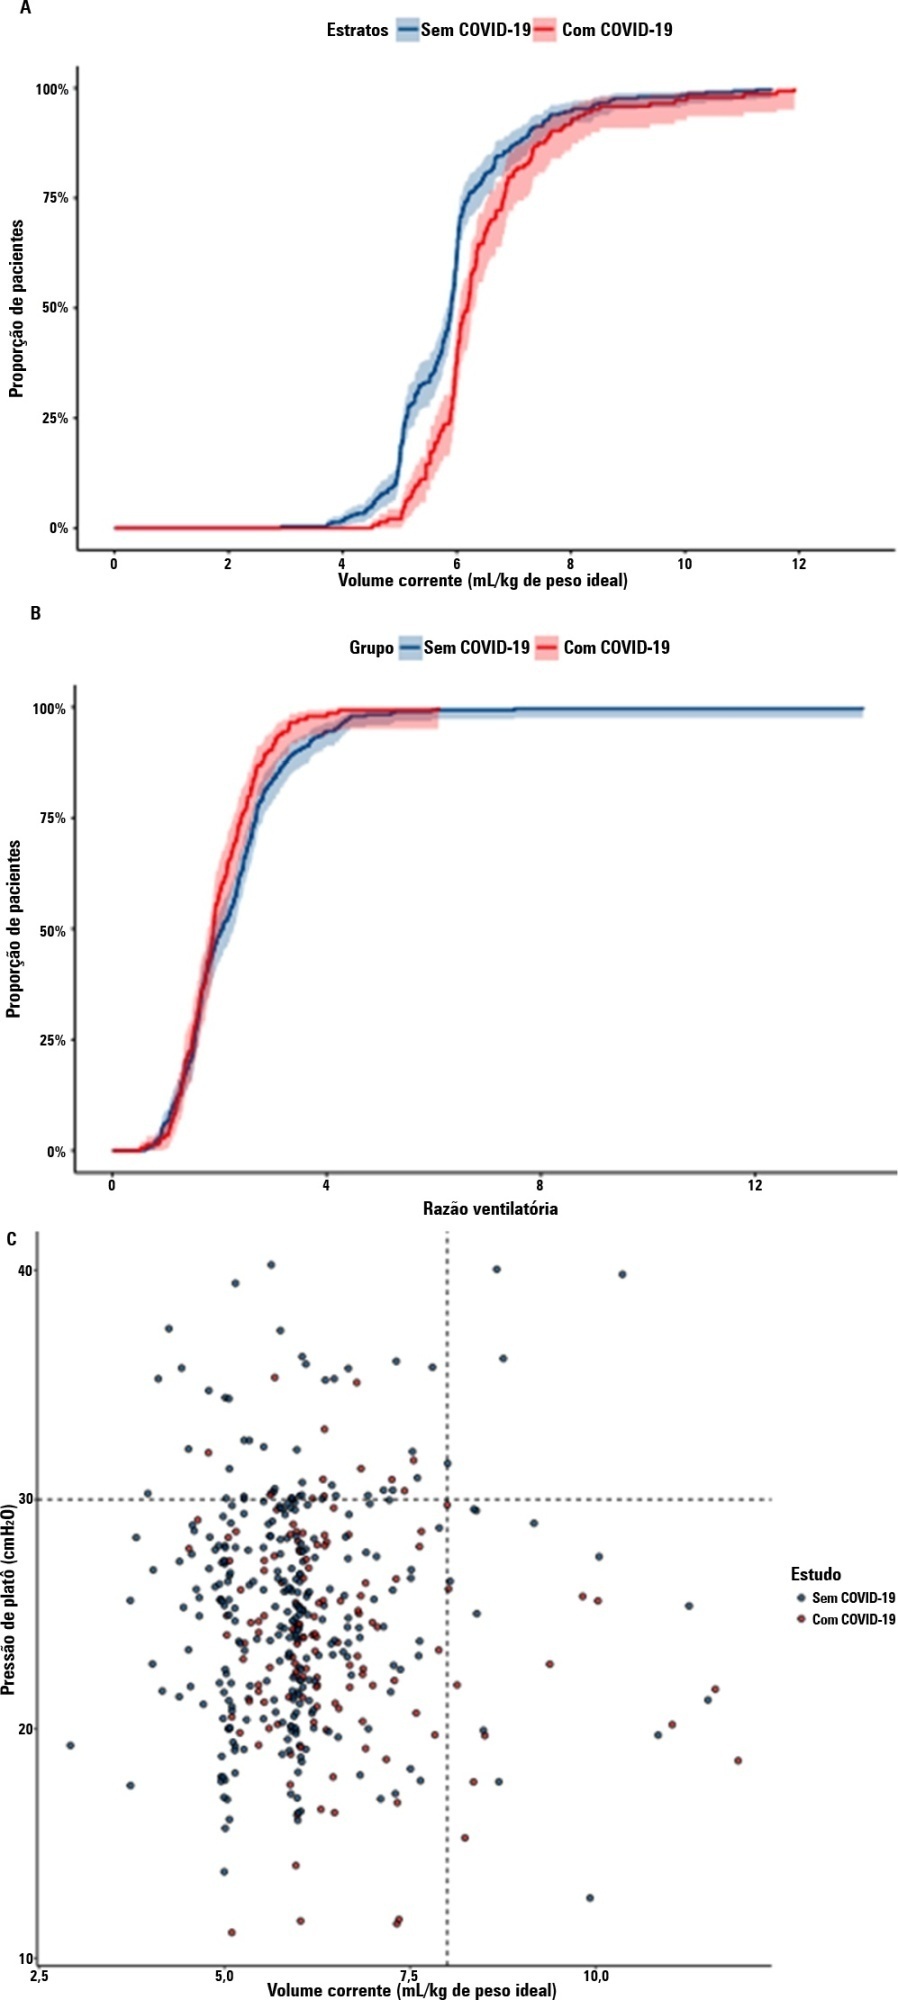 Clinical outcomes and lung mechanics characteristics between COVID-19 and non-COVID-19-associated acute respiratory distress syndrome: a propensity score analysis of two major randomized trials